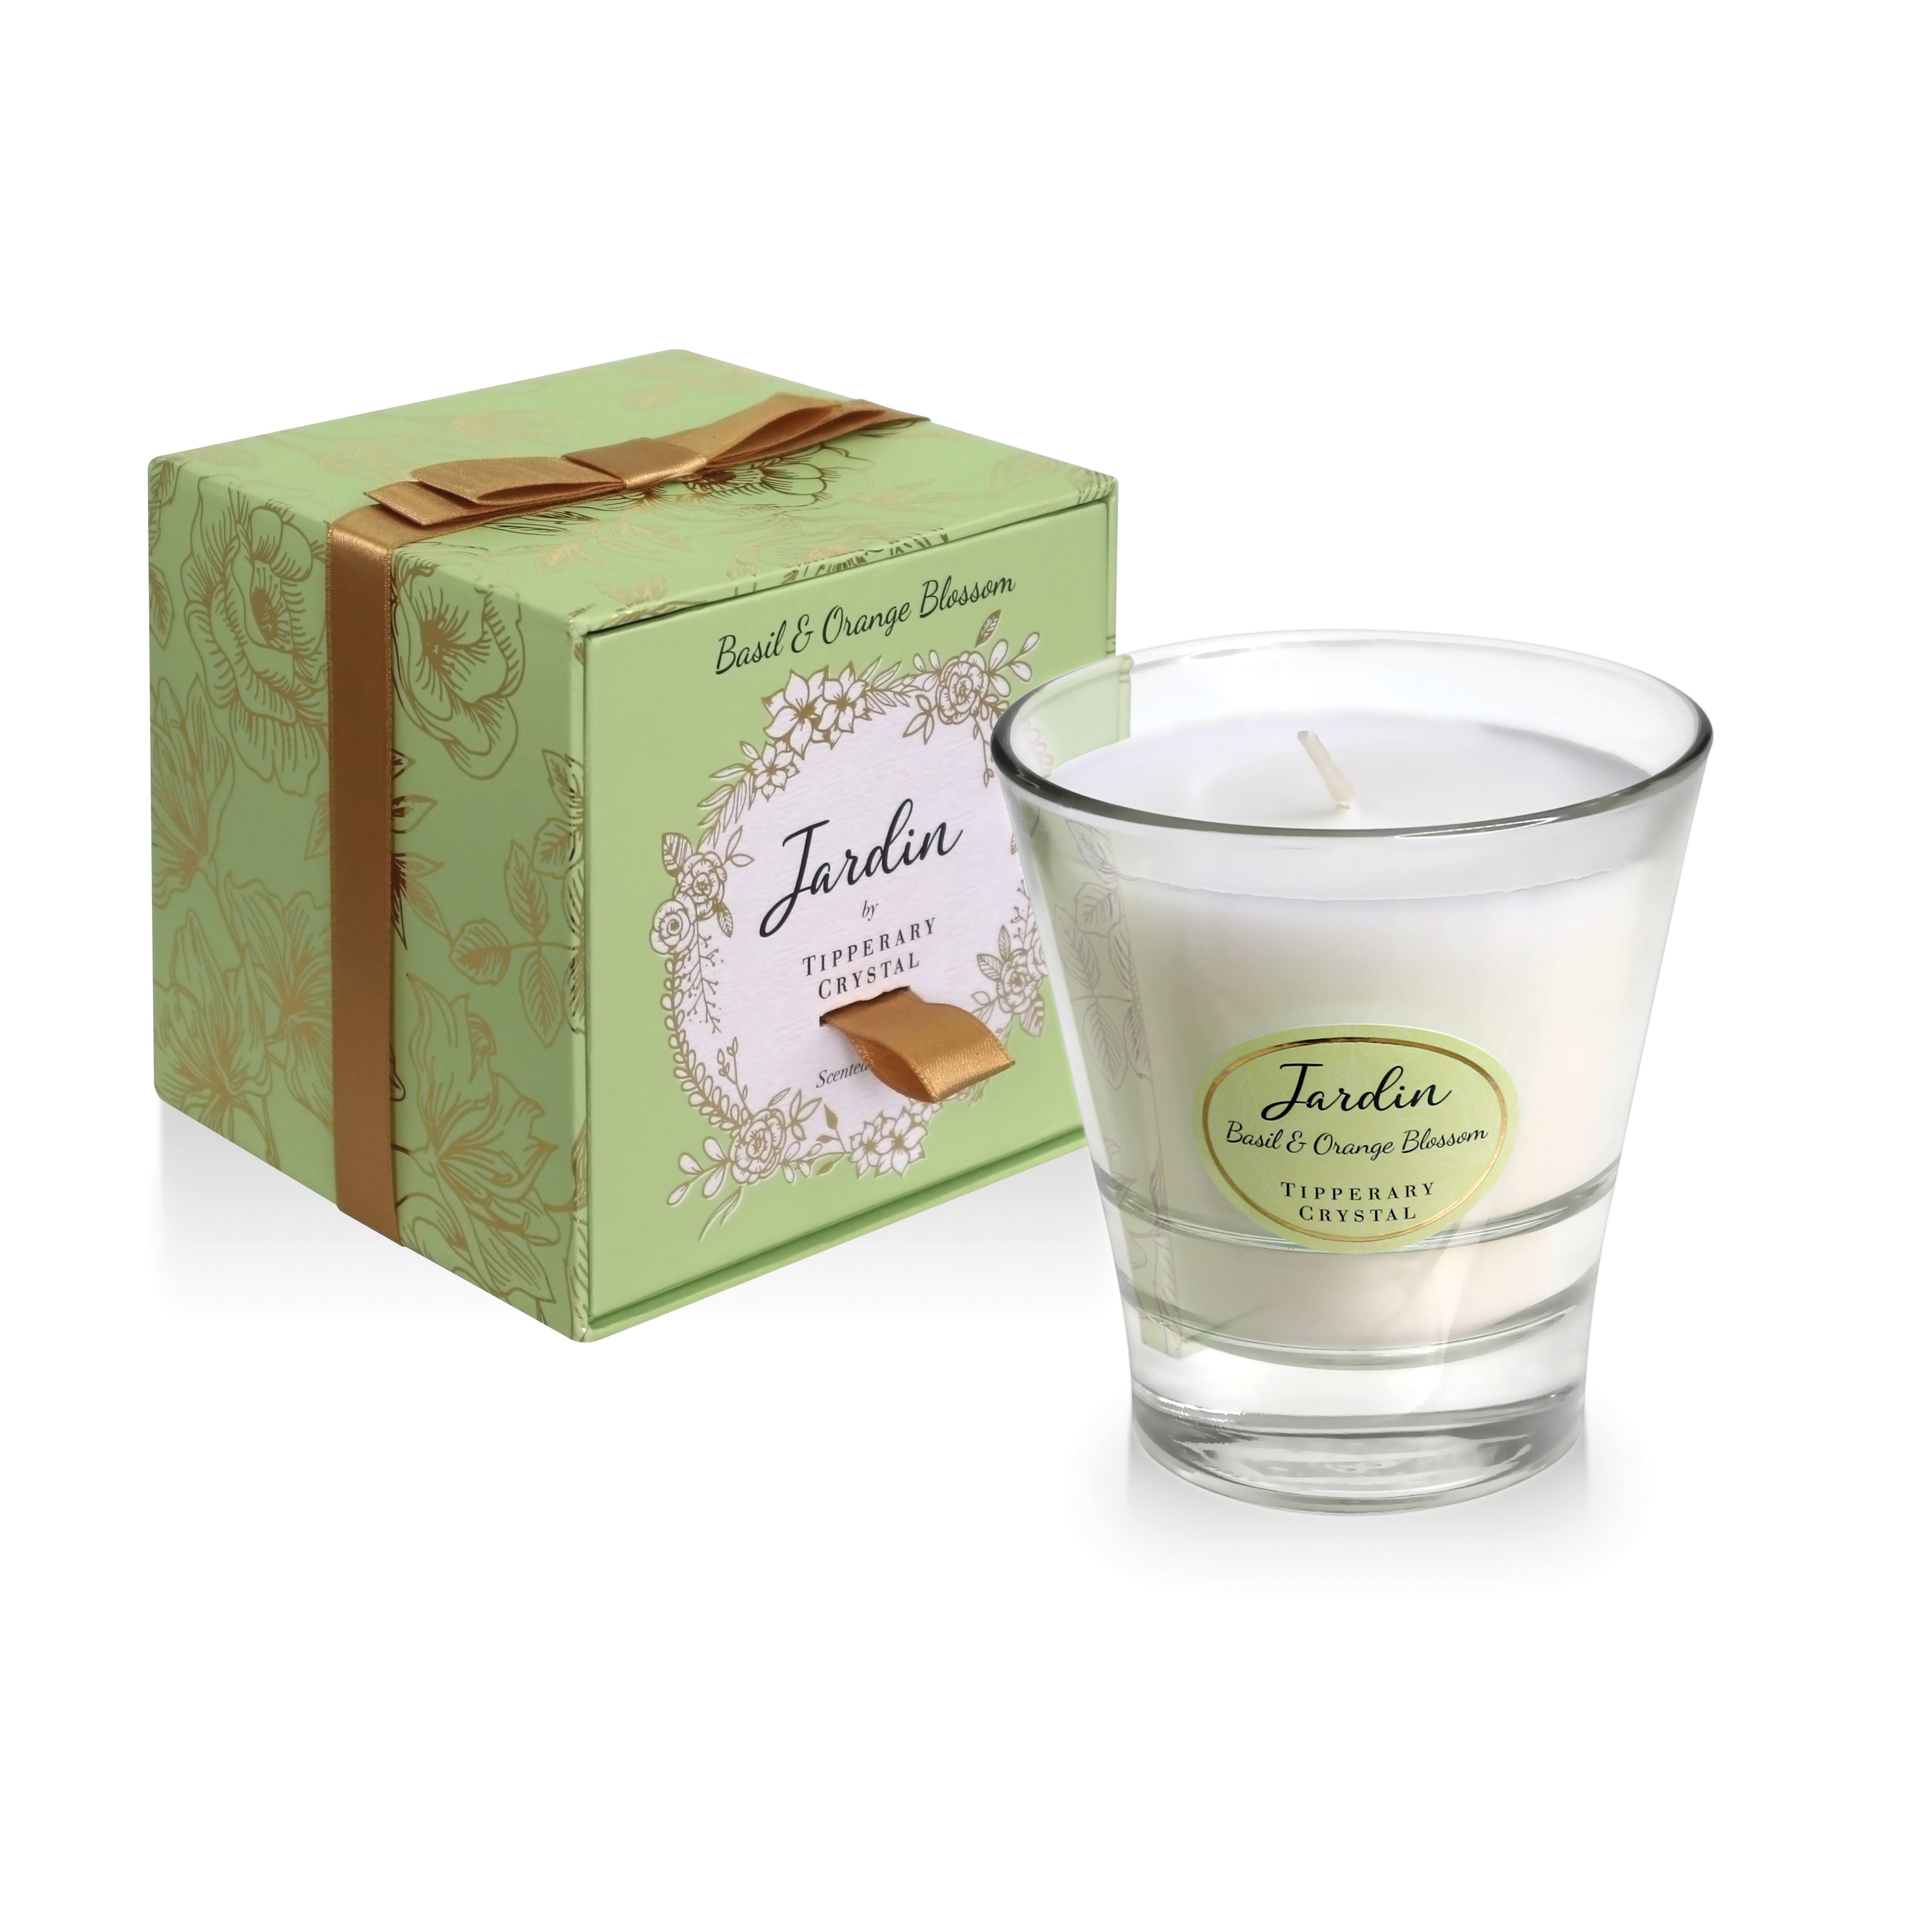 Tipperary Crystal Jardin Collection Basil & Orange Blossom Scented Candle